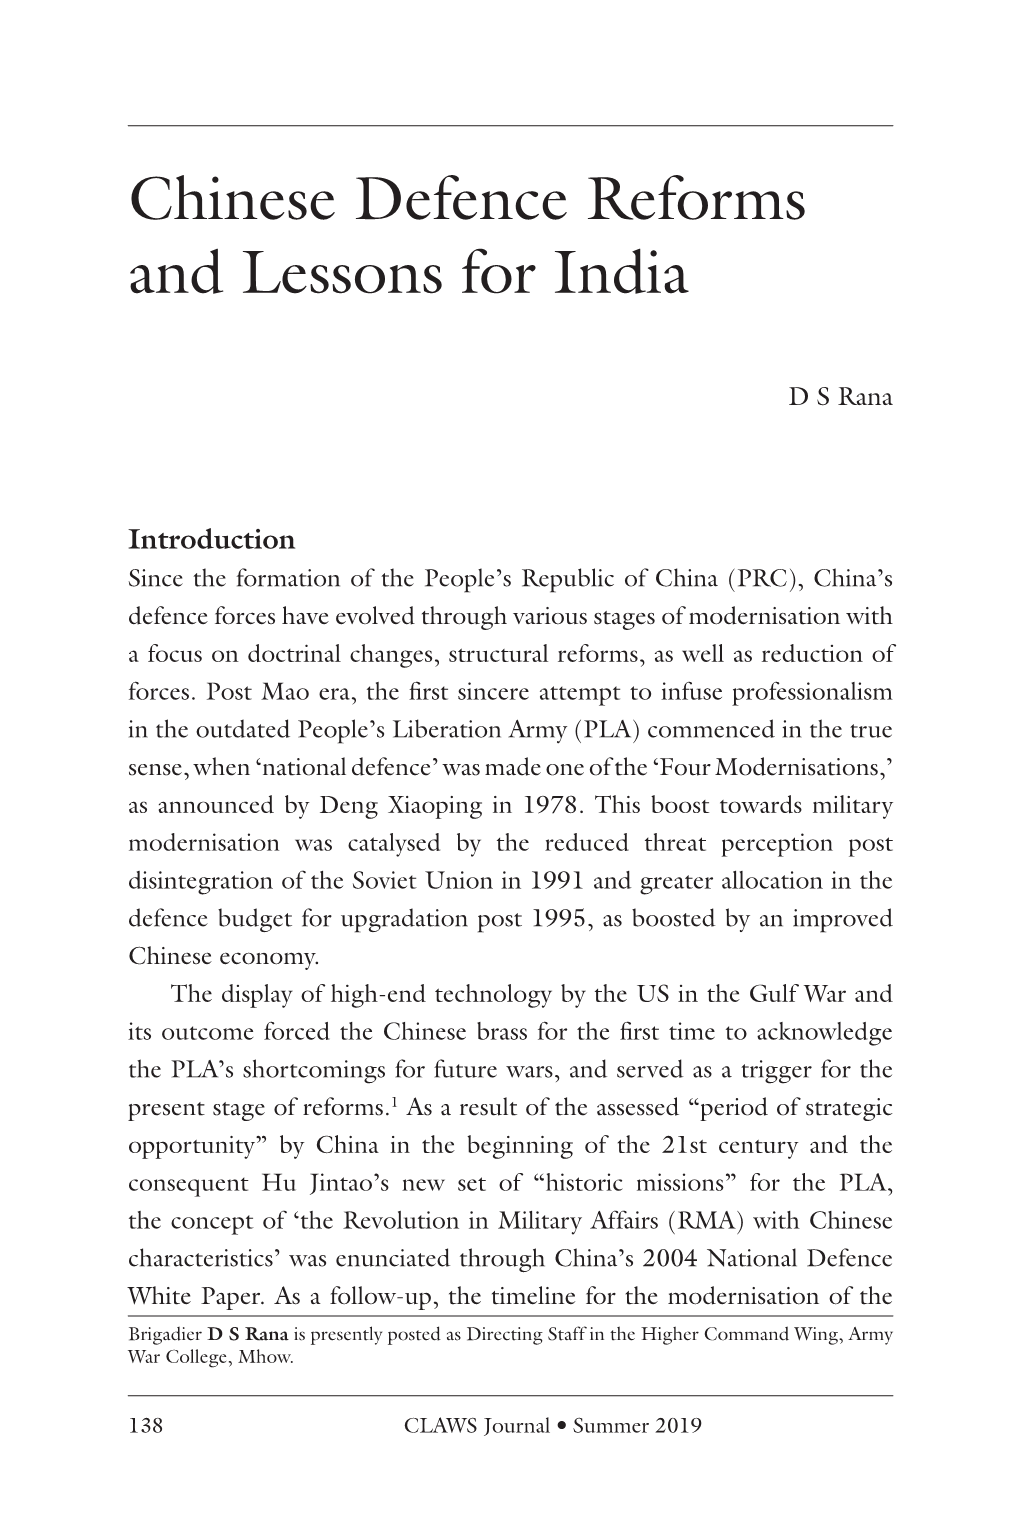 Chinese Defence Reforms and Lessons for India